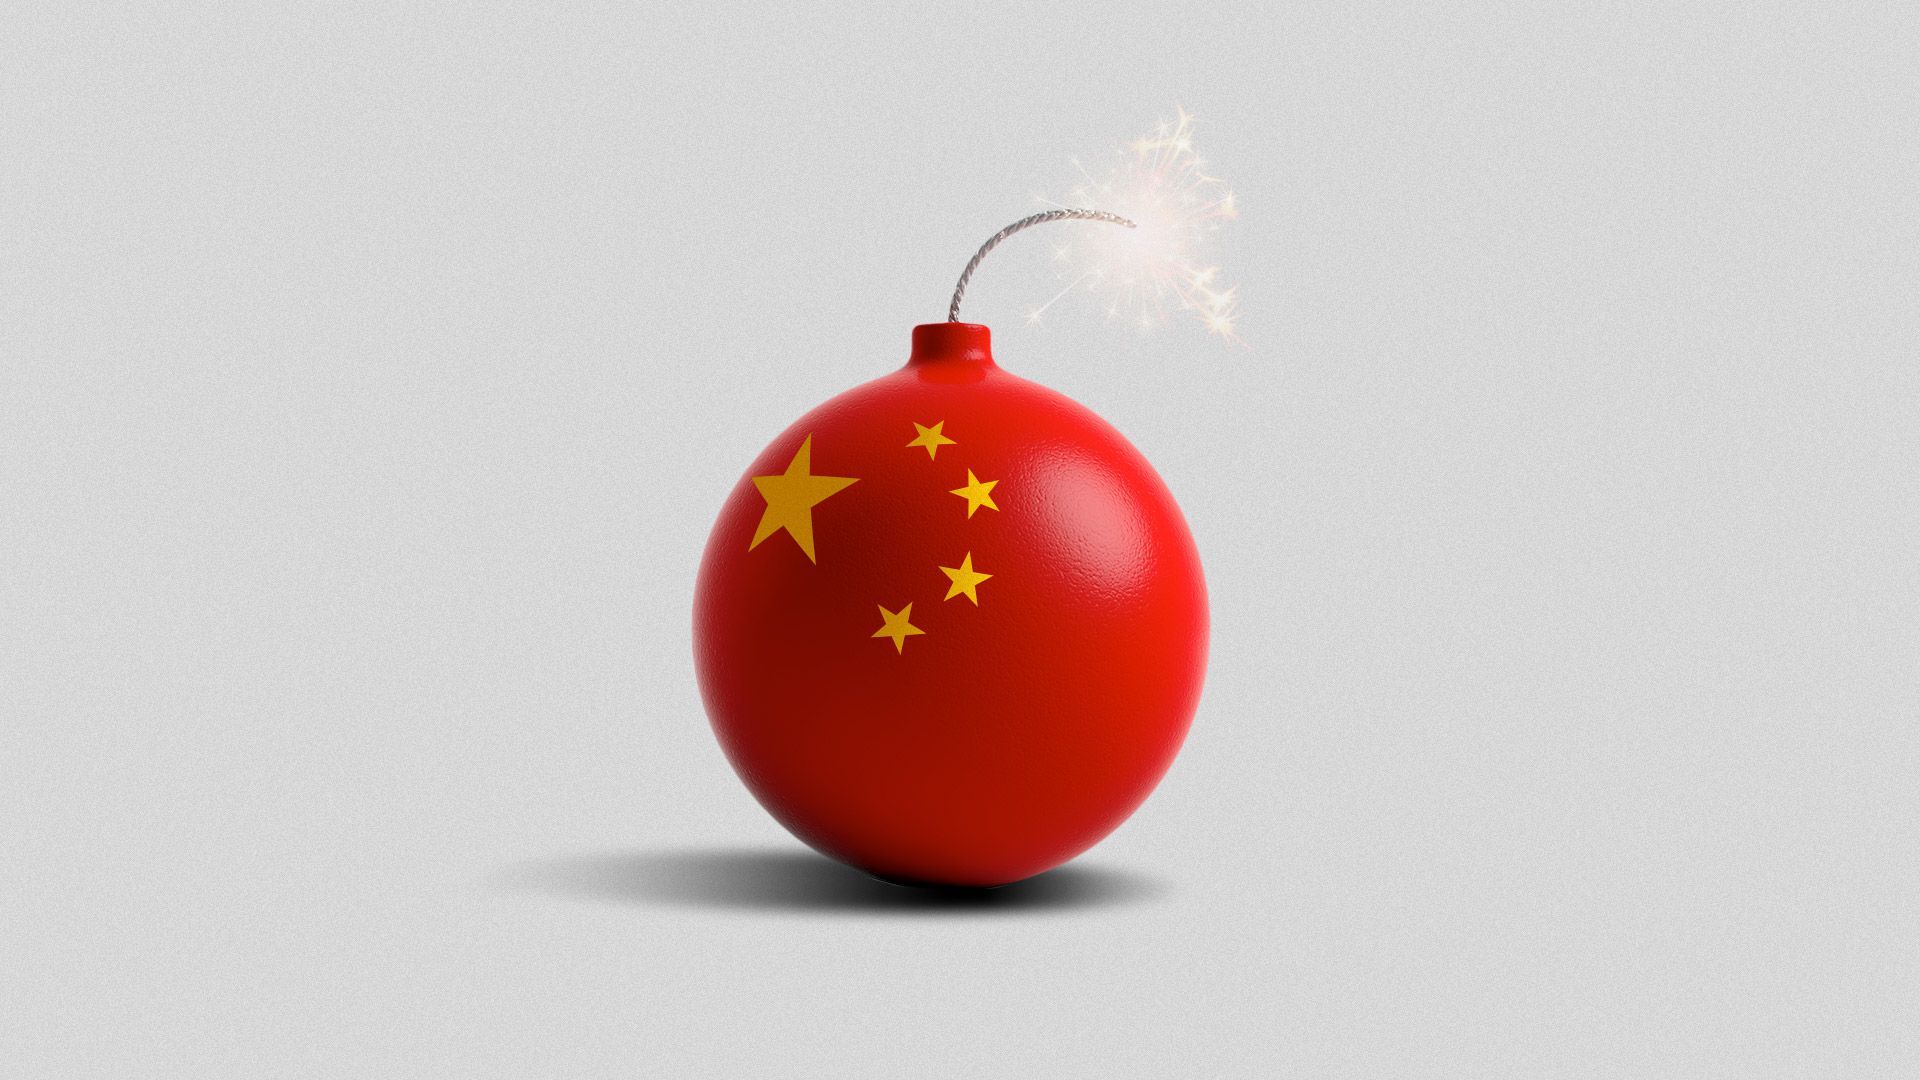 In this illustration, a bomb is decorated with China's flag.